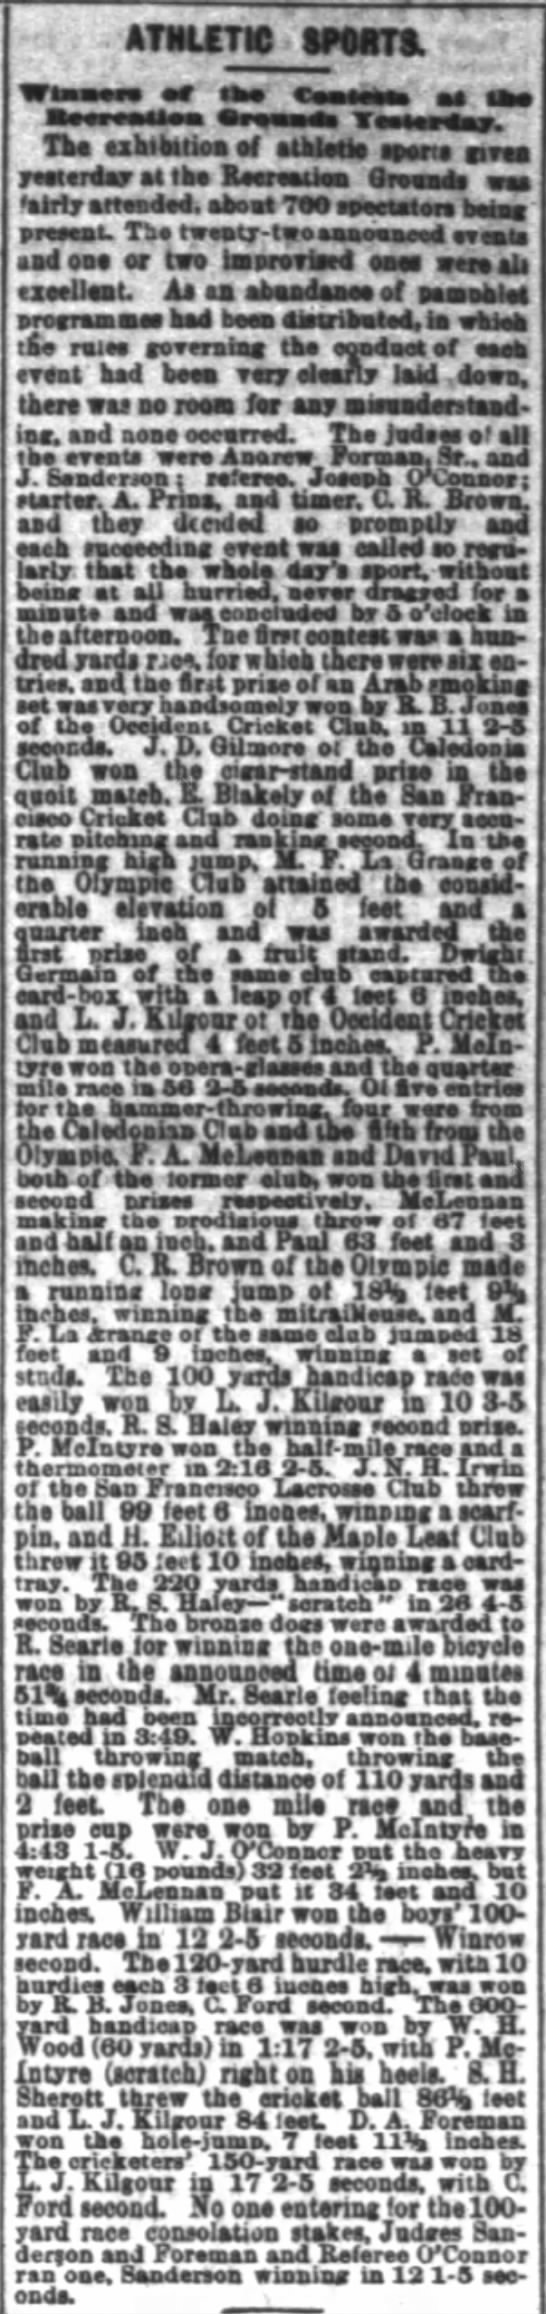 R. Searle wins first outdoor bicycle race in San Francisco? 2/23/1879 - 